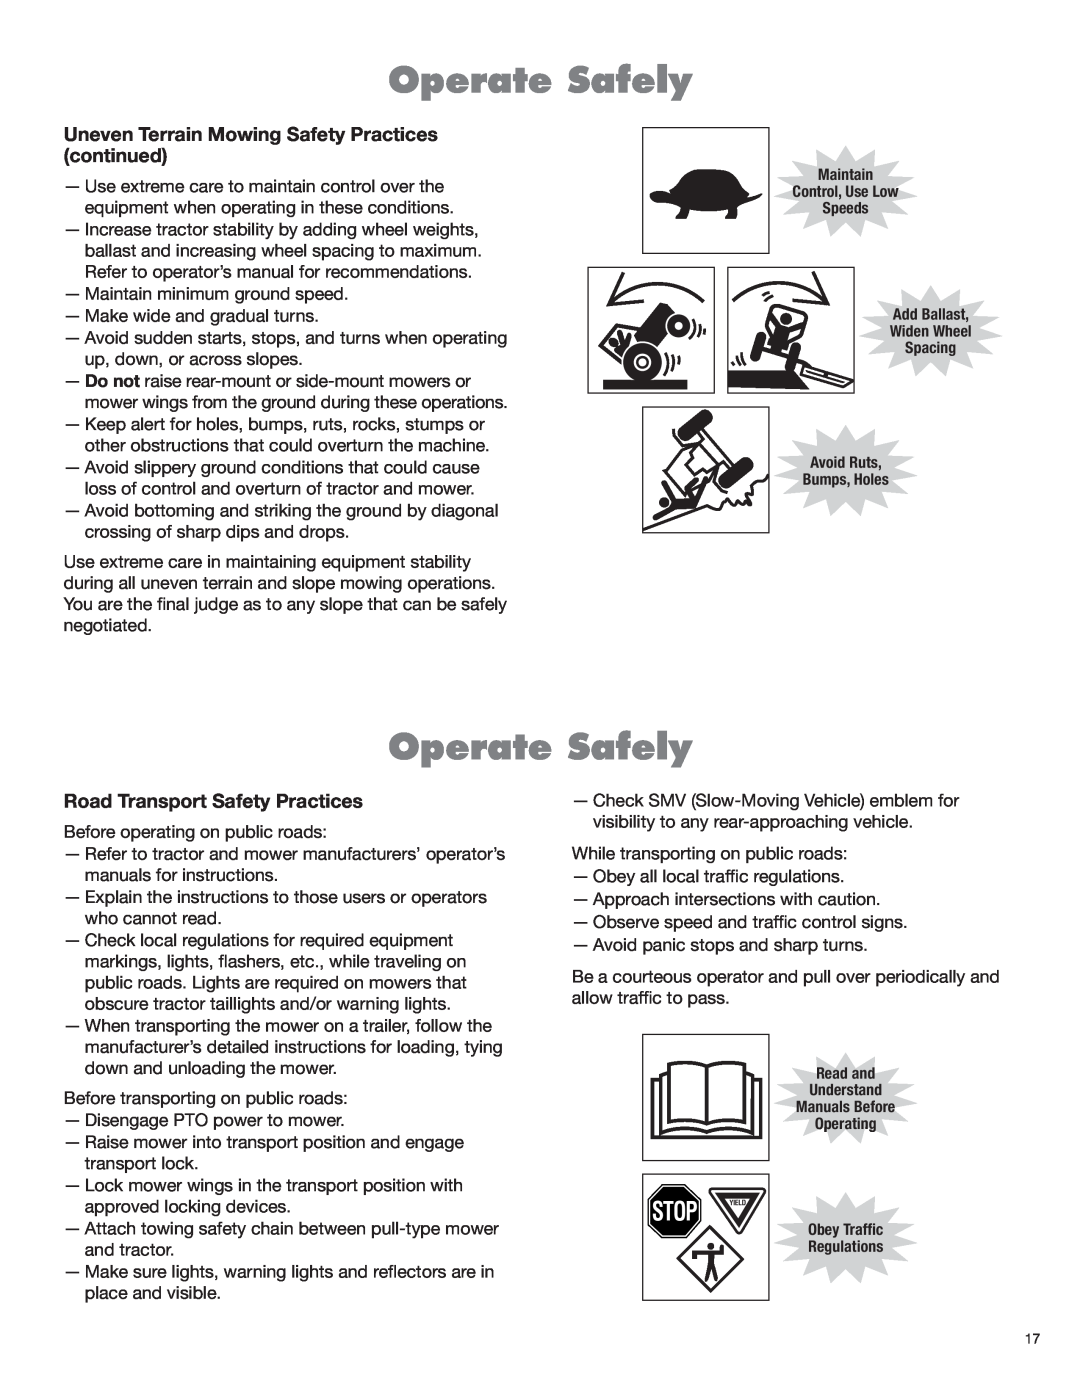 Servis-Rhino 2160 manual Stop Yield, Operate Safely, Uneven Terrain Mowing Safety Practices continued 